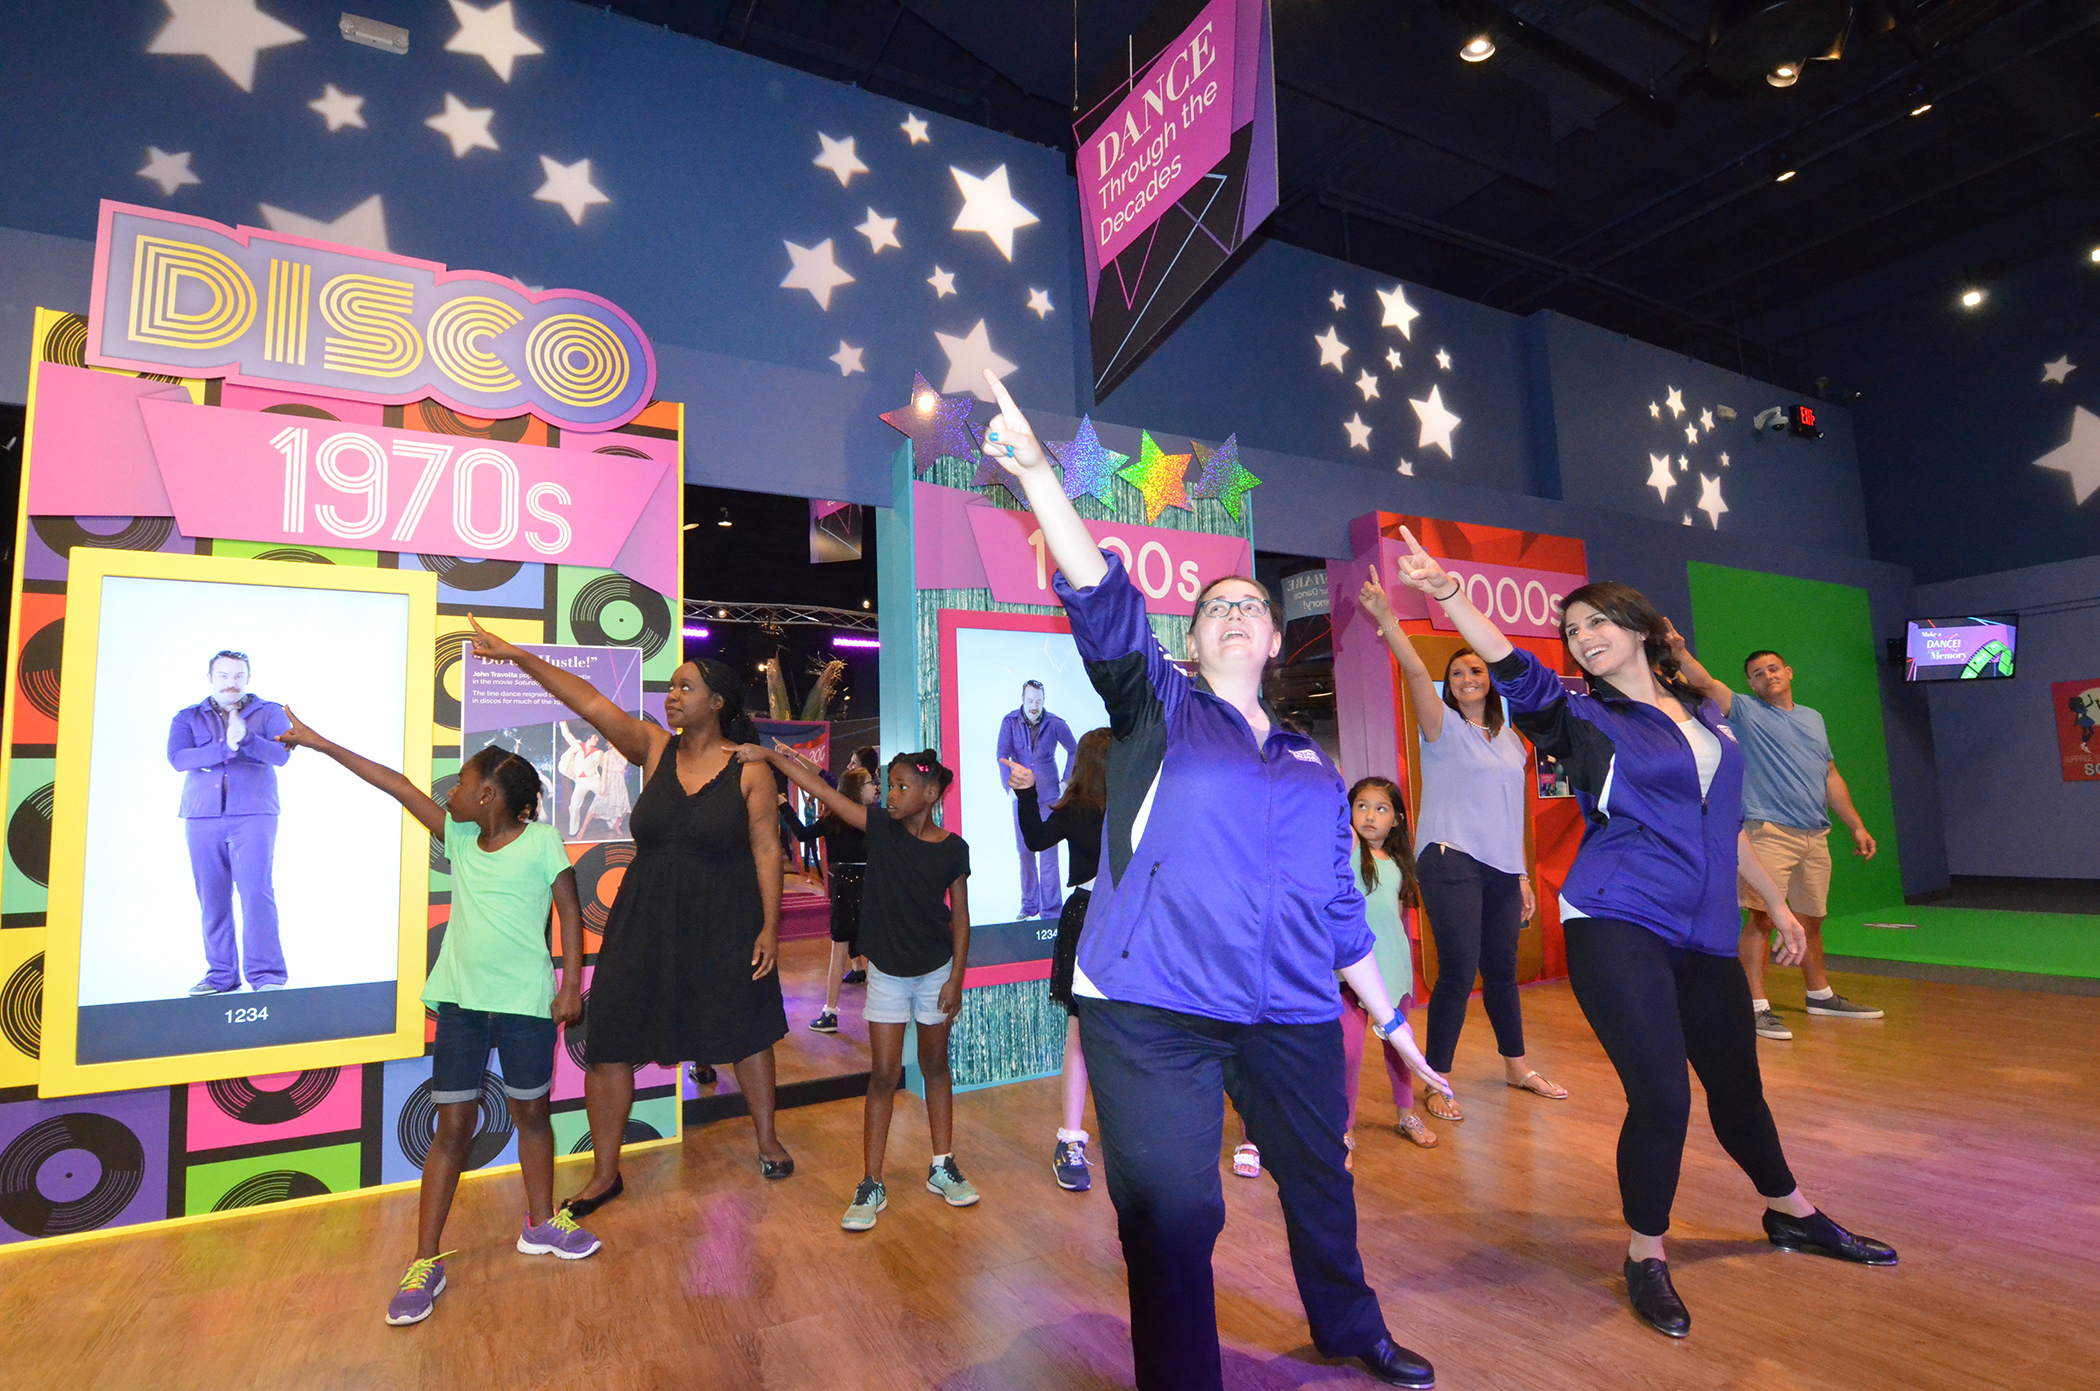 Disco fever is alive and well at the world's largest children's museum